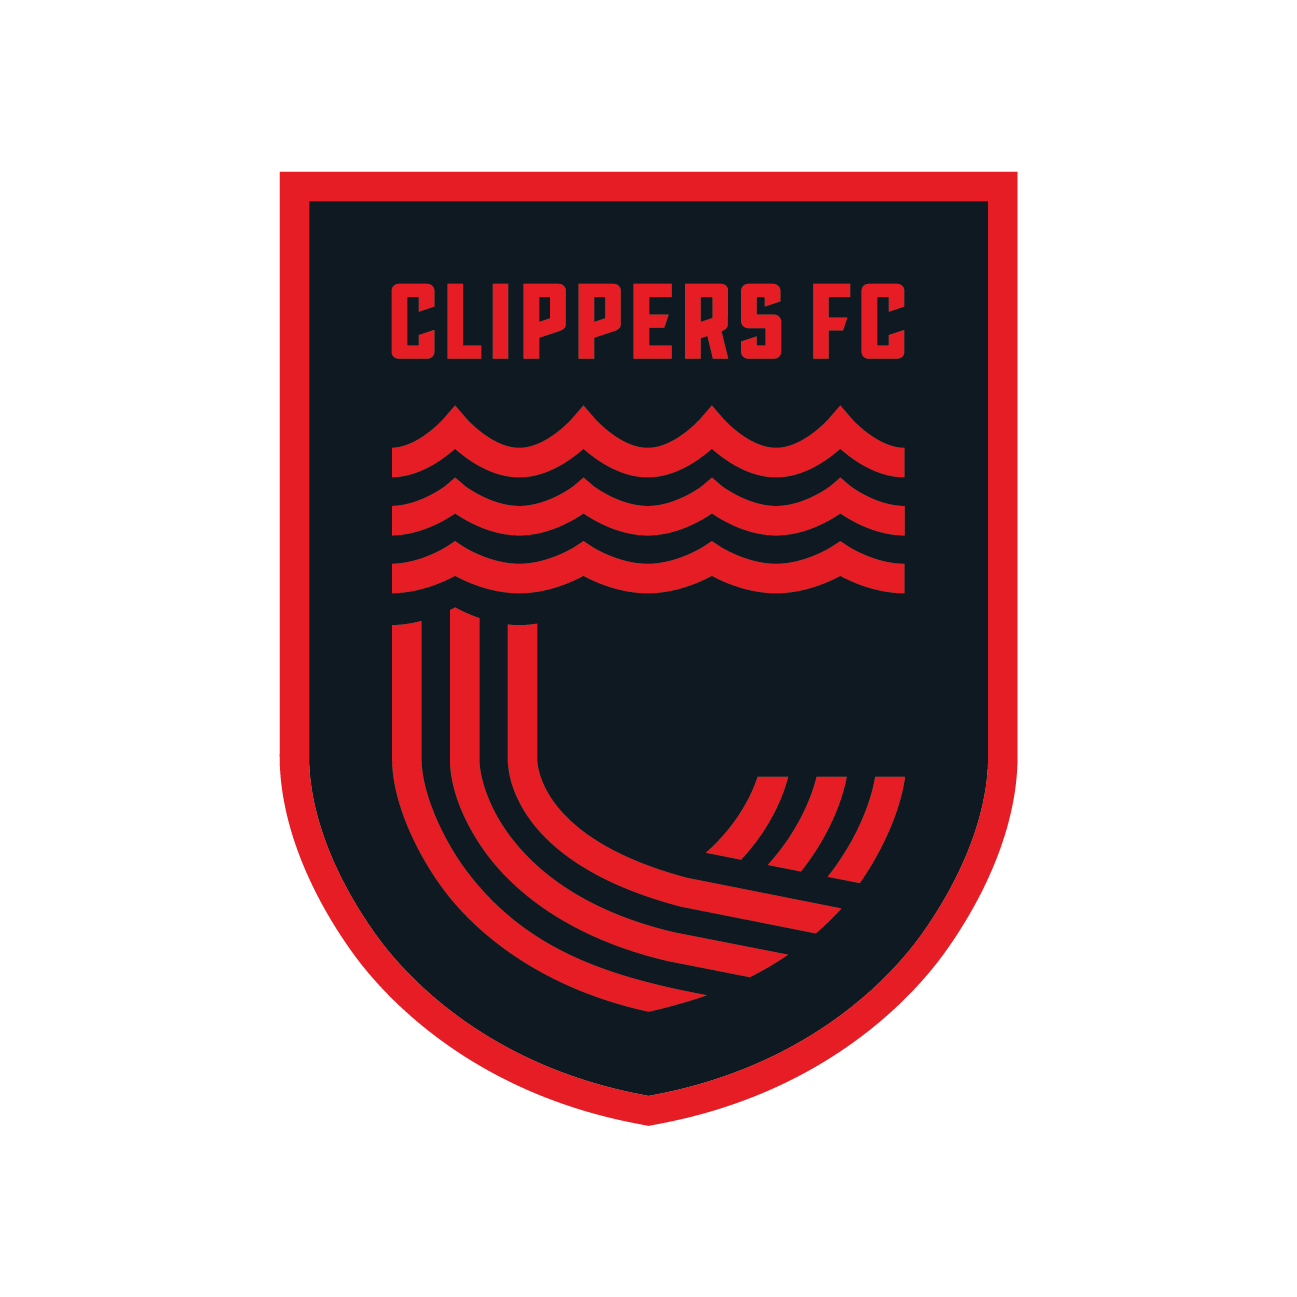 Clippers FC Oakland Bay Area